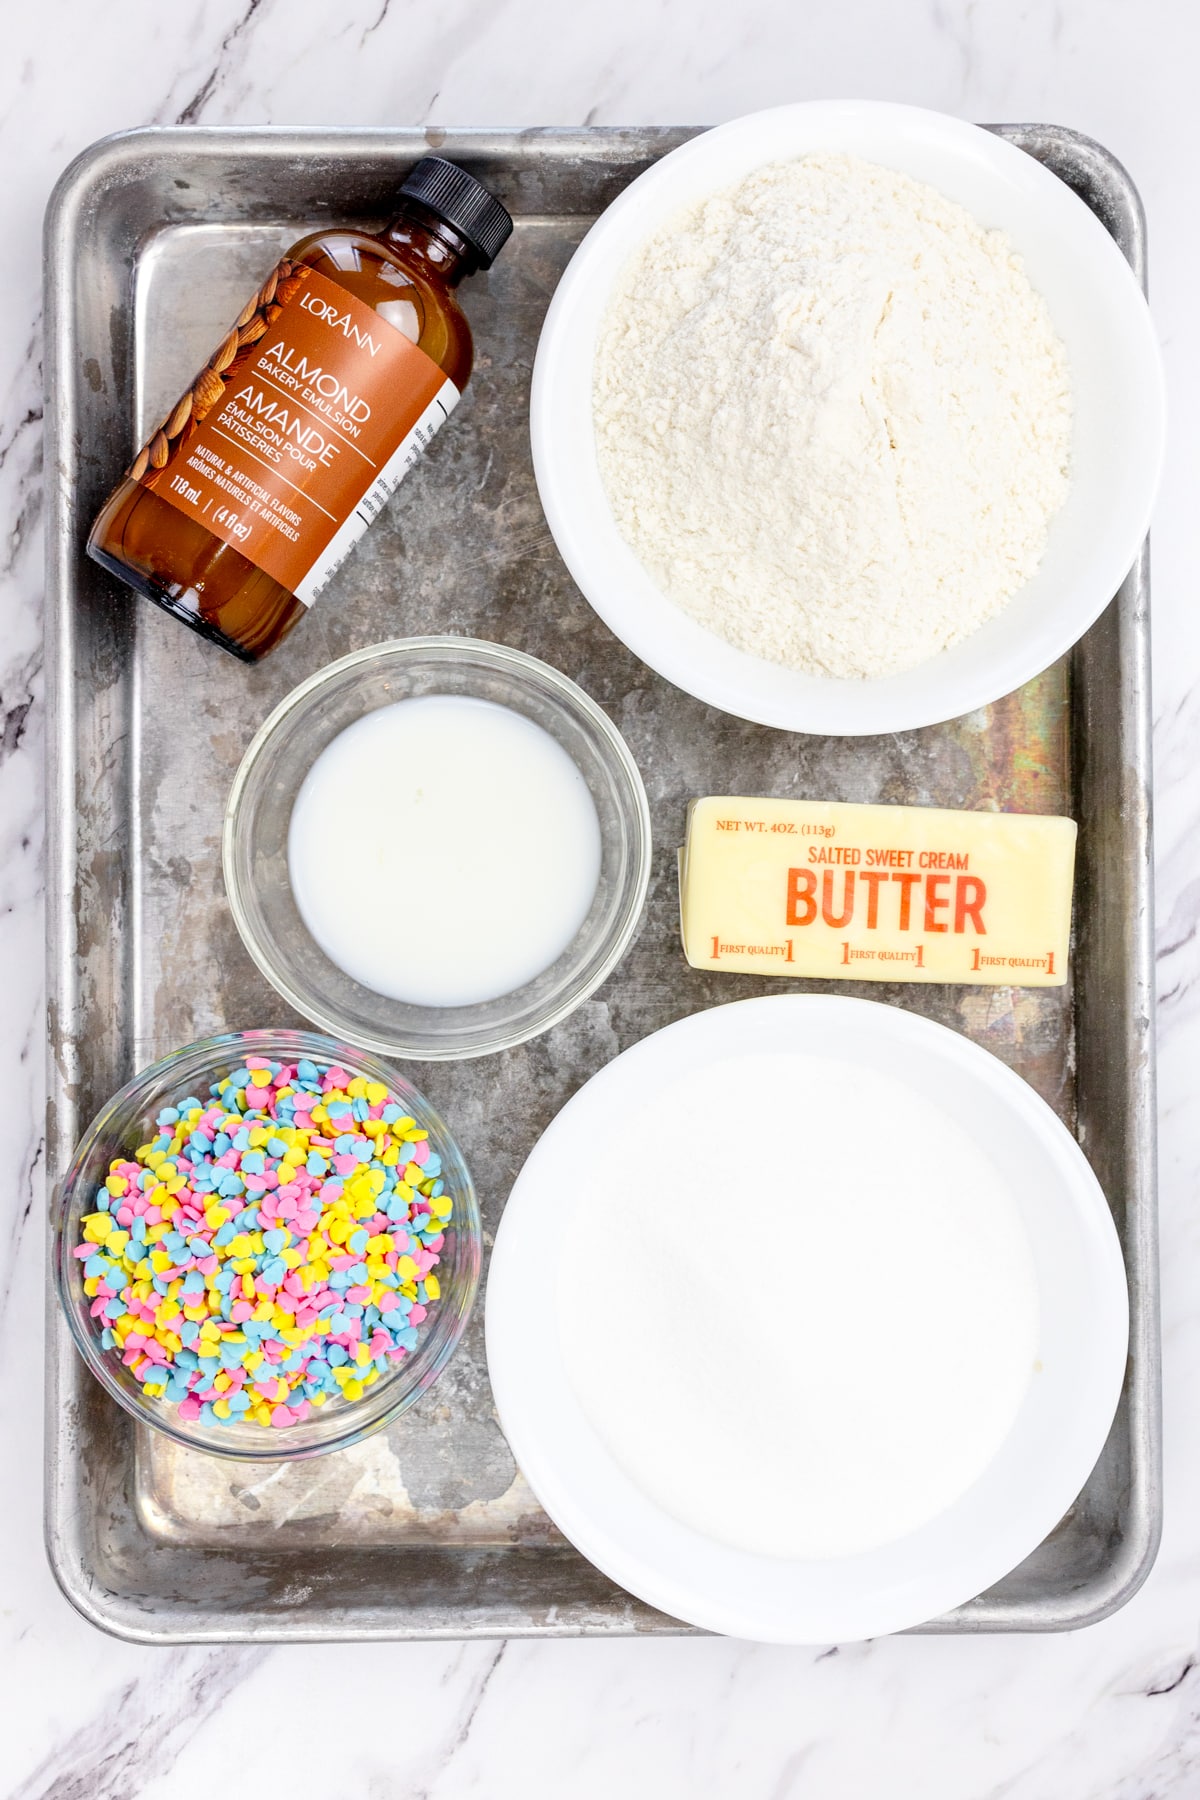 Top view of ingredients needed to make Edible Sugar Cookie Dough in small bowls on a baking tray.